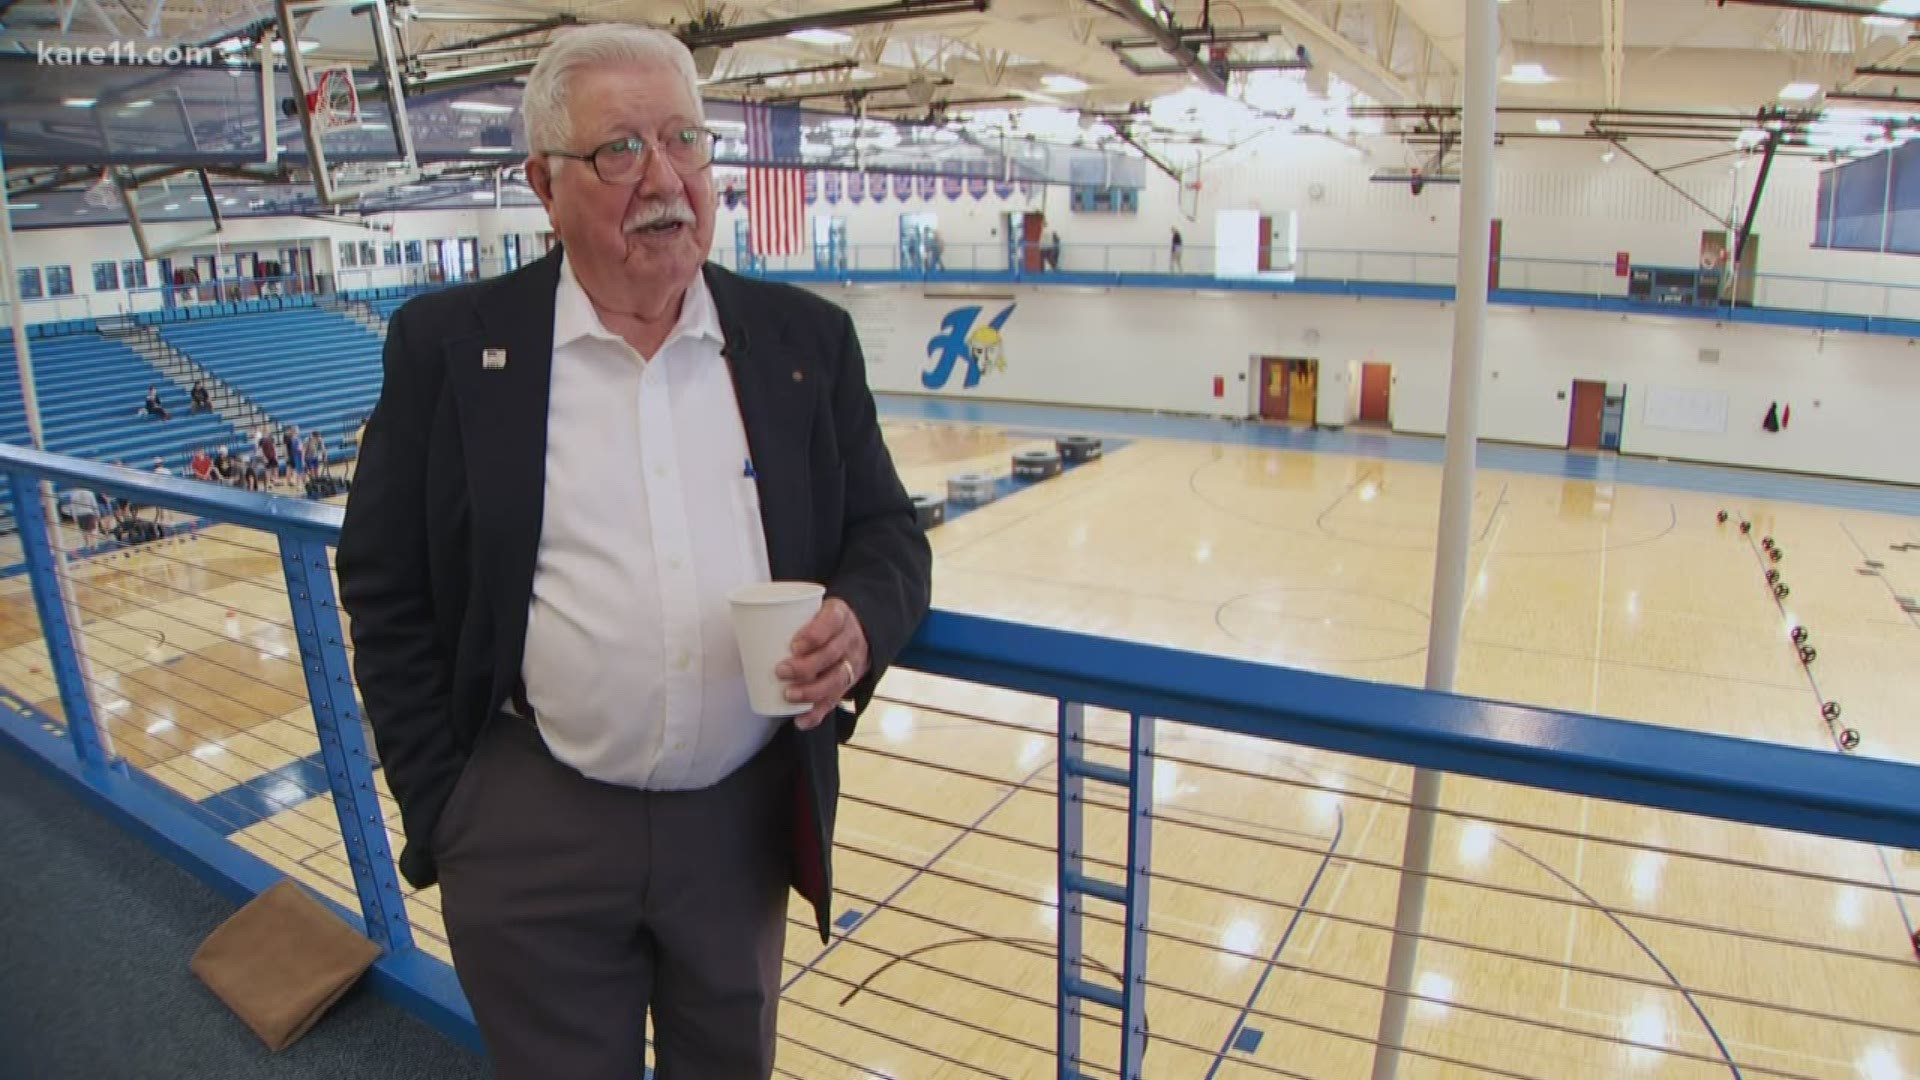 Air Force veteran Loren Mollet strikes up friendship while walking the track in the Hastings High School gym.